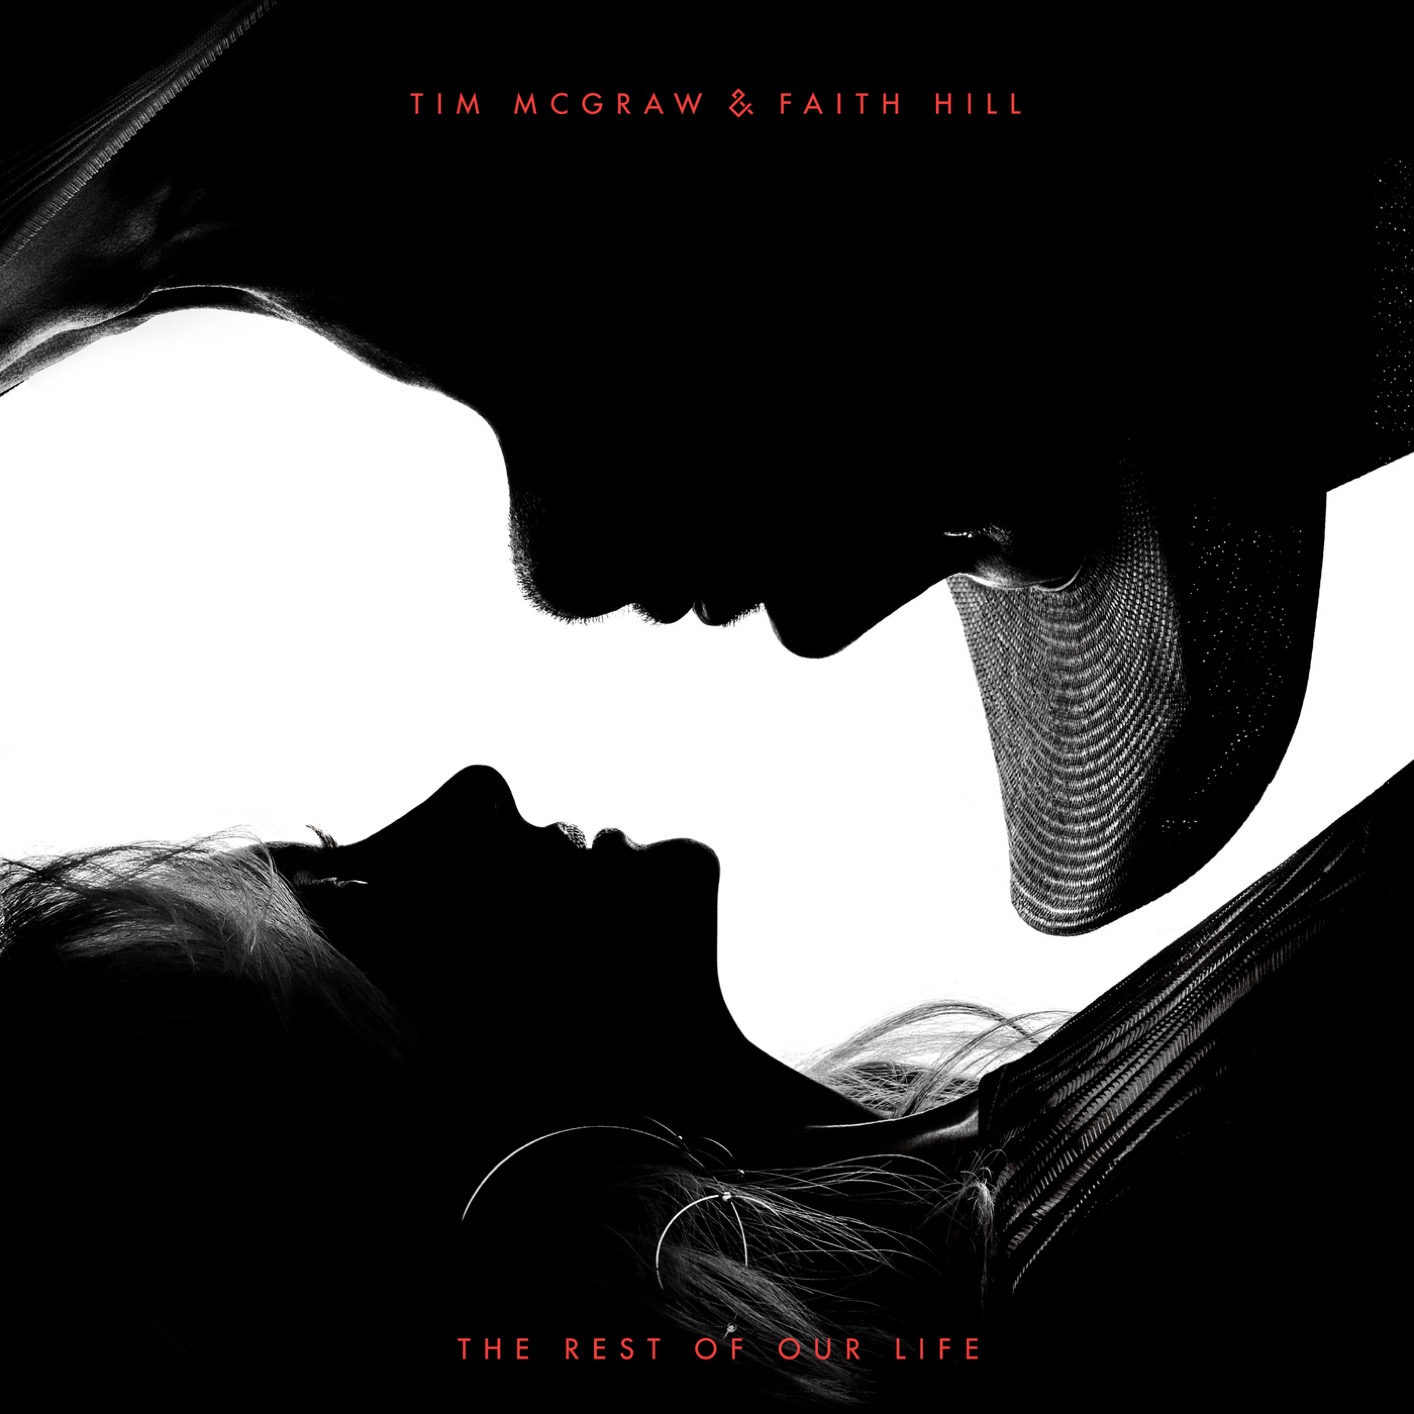 Tim McGraw & Faith Hill – The Rest of Our Life (2017) [Qobuz FLAC 24bit/44,1kHz]